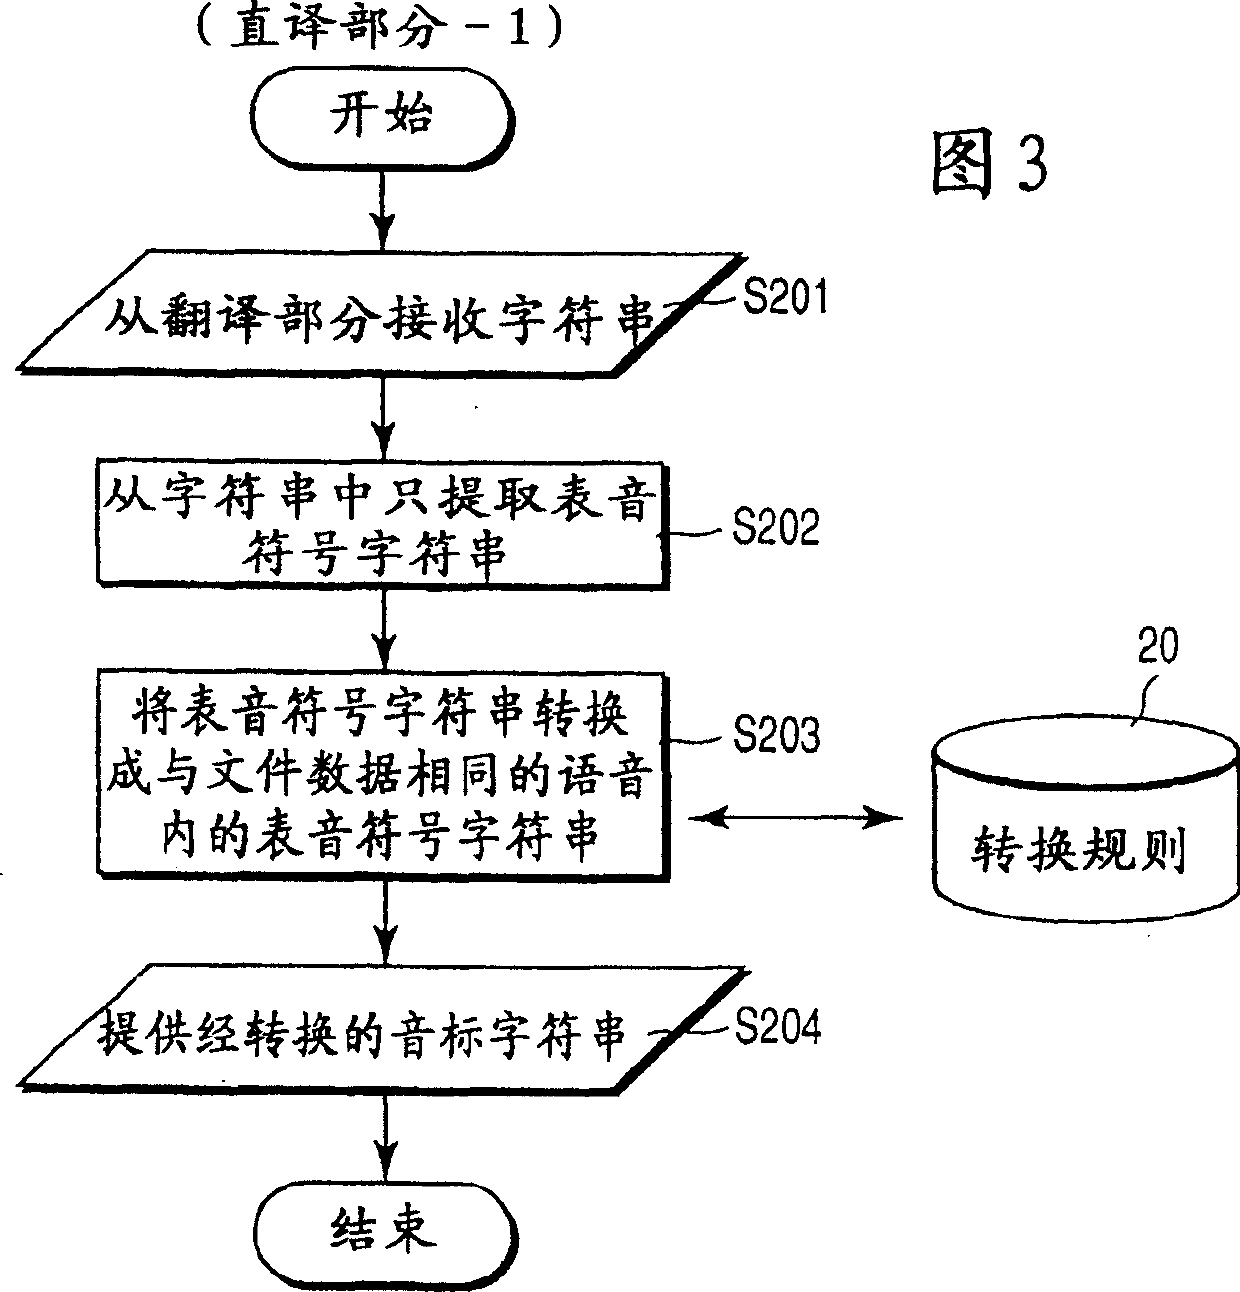 Device and method for intercrossing language information retrieval